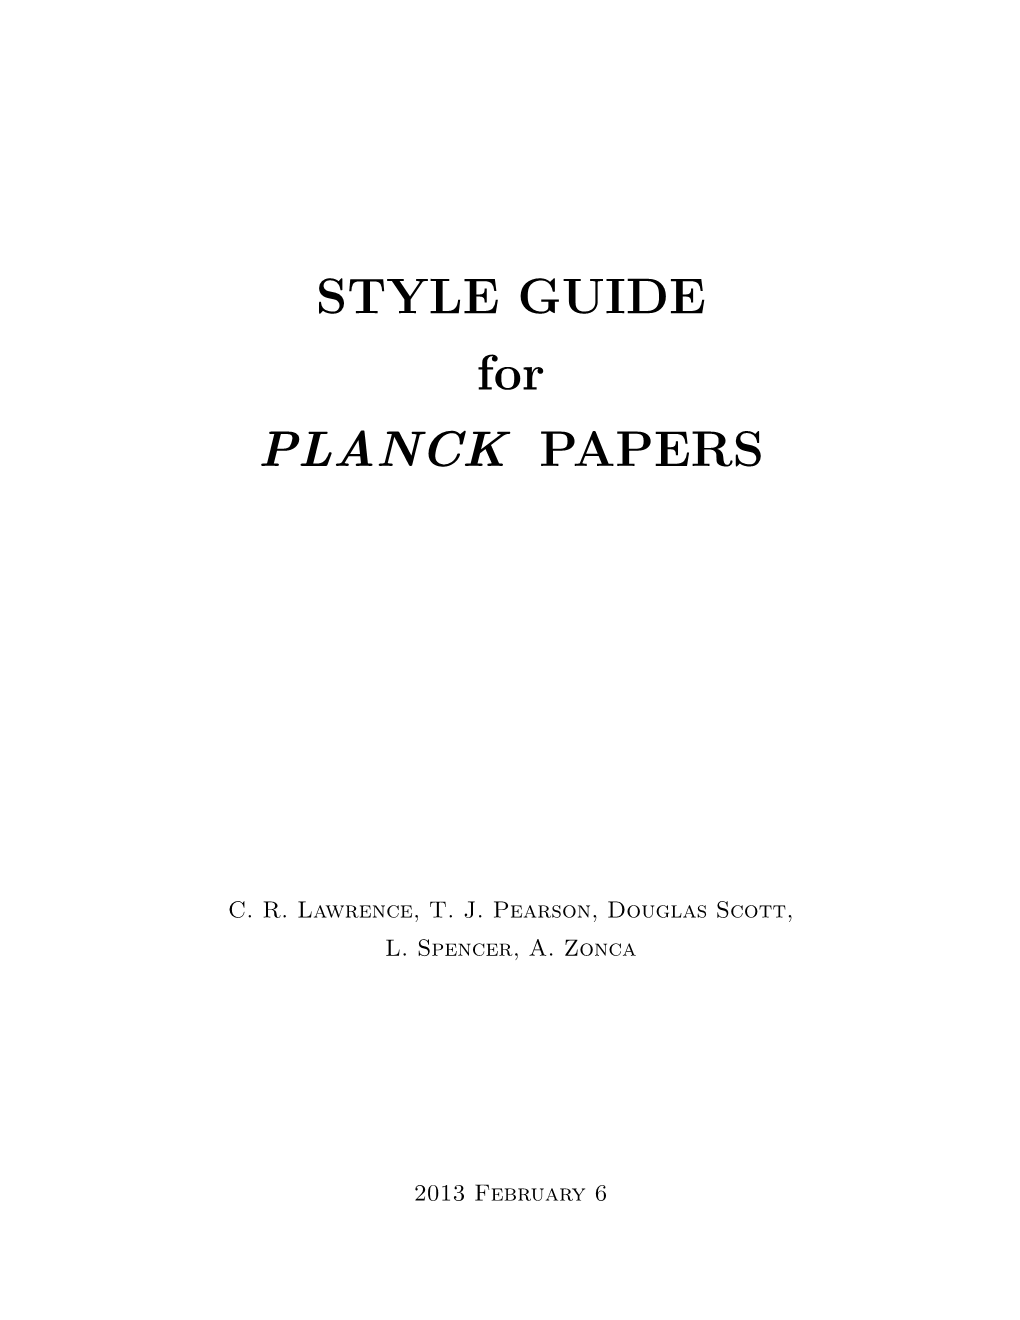 STYLE GUIDE for PLANCK PAPERS